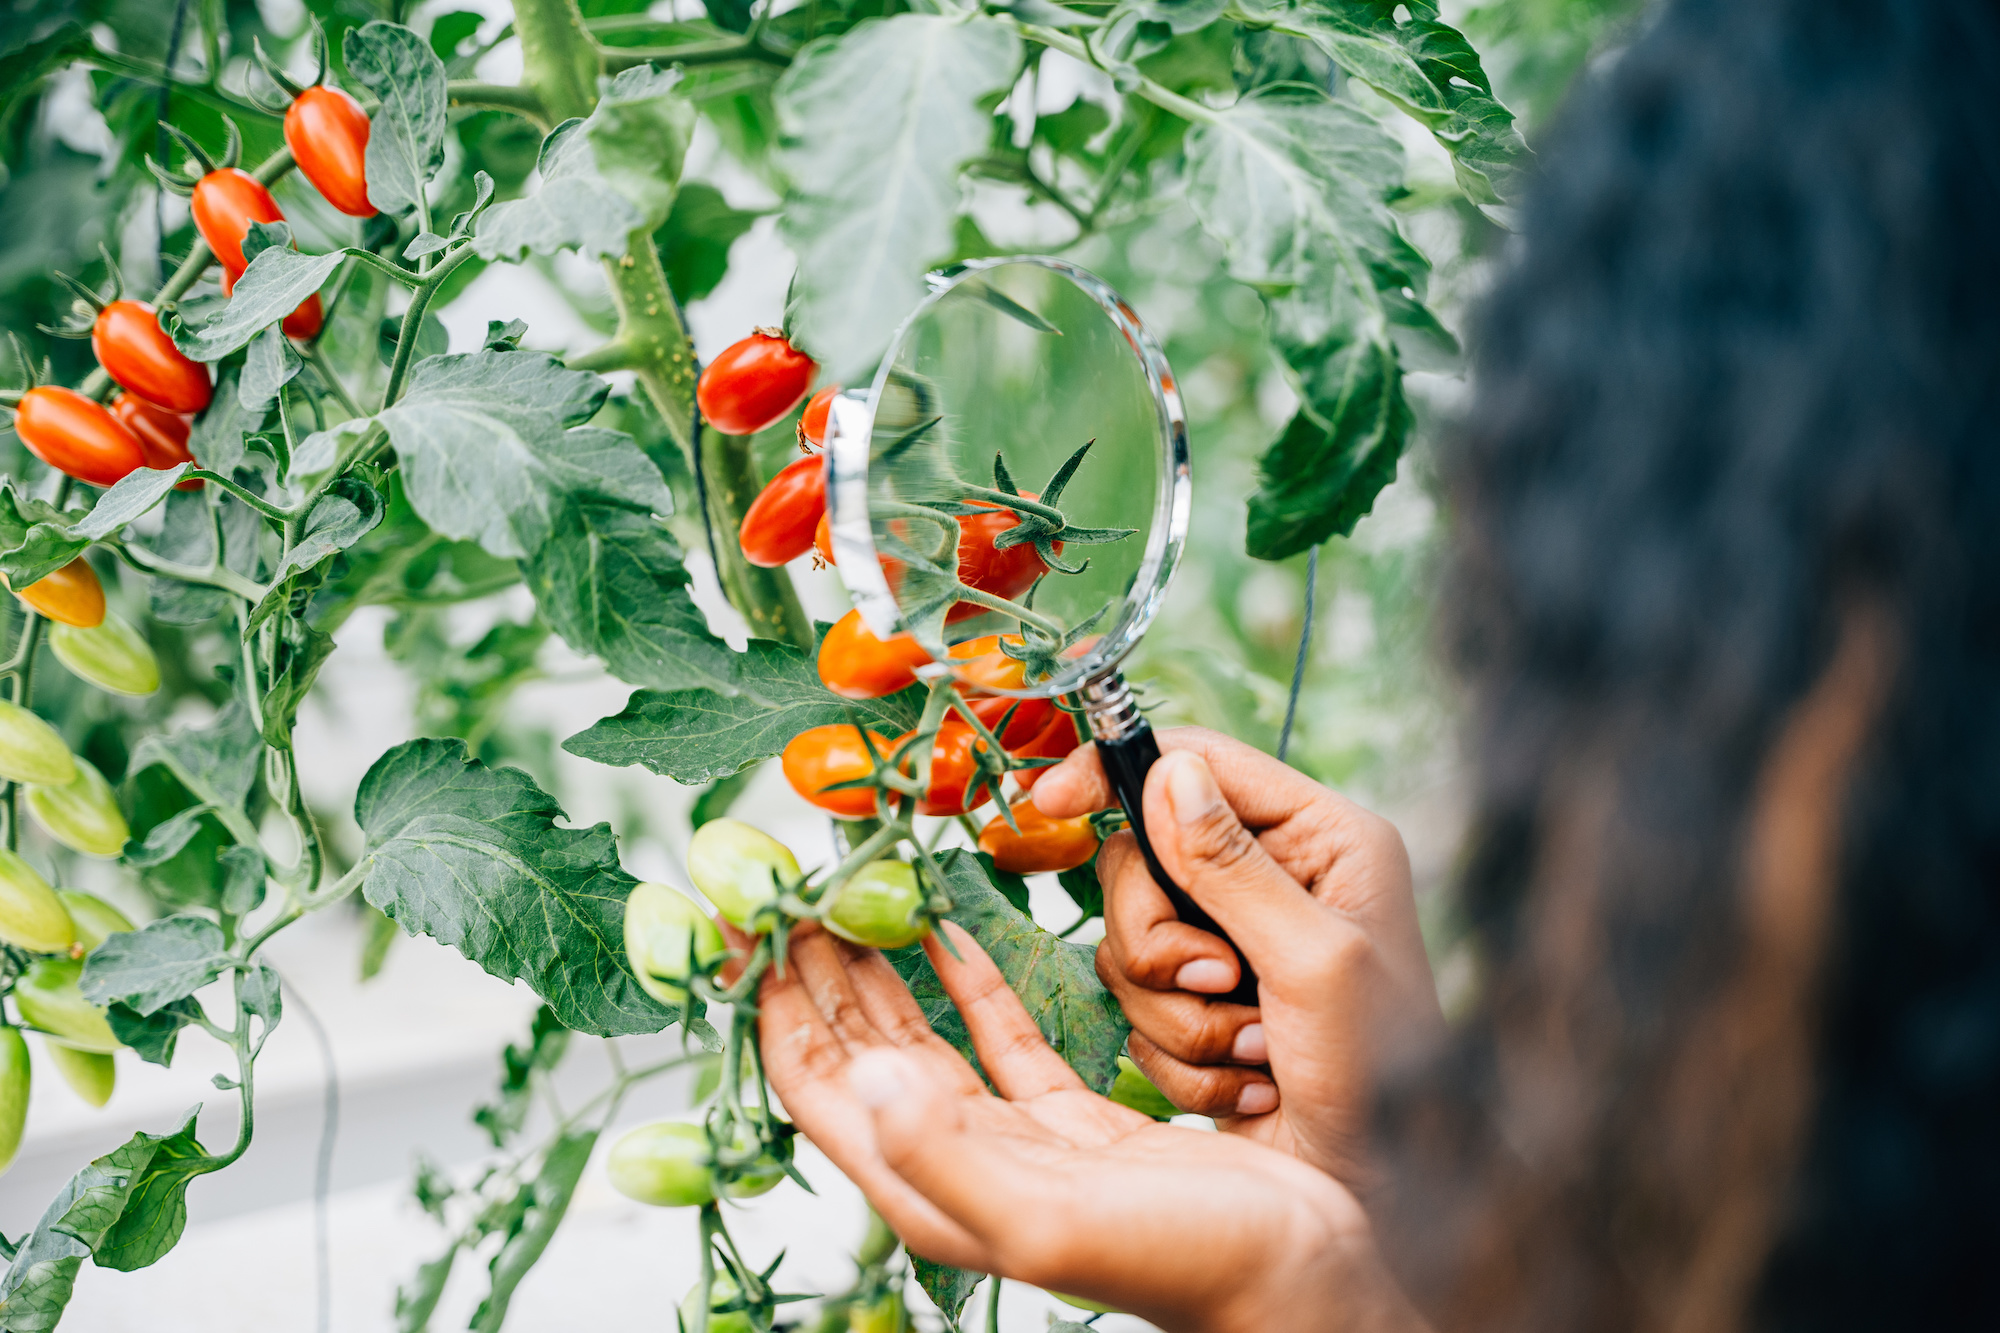 Young woman farmer inspects tomato quality in a greenhouse using a magnifying glass. Her expertise focus and dedication to farming research demonstrate intelligence and scientific discovery.